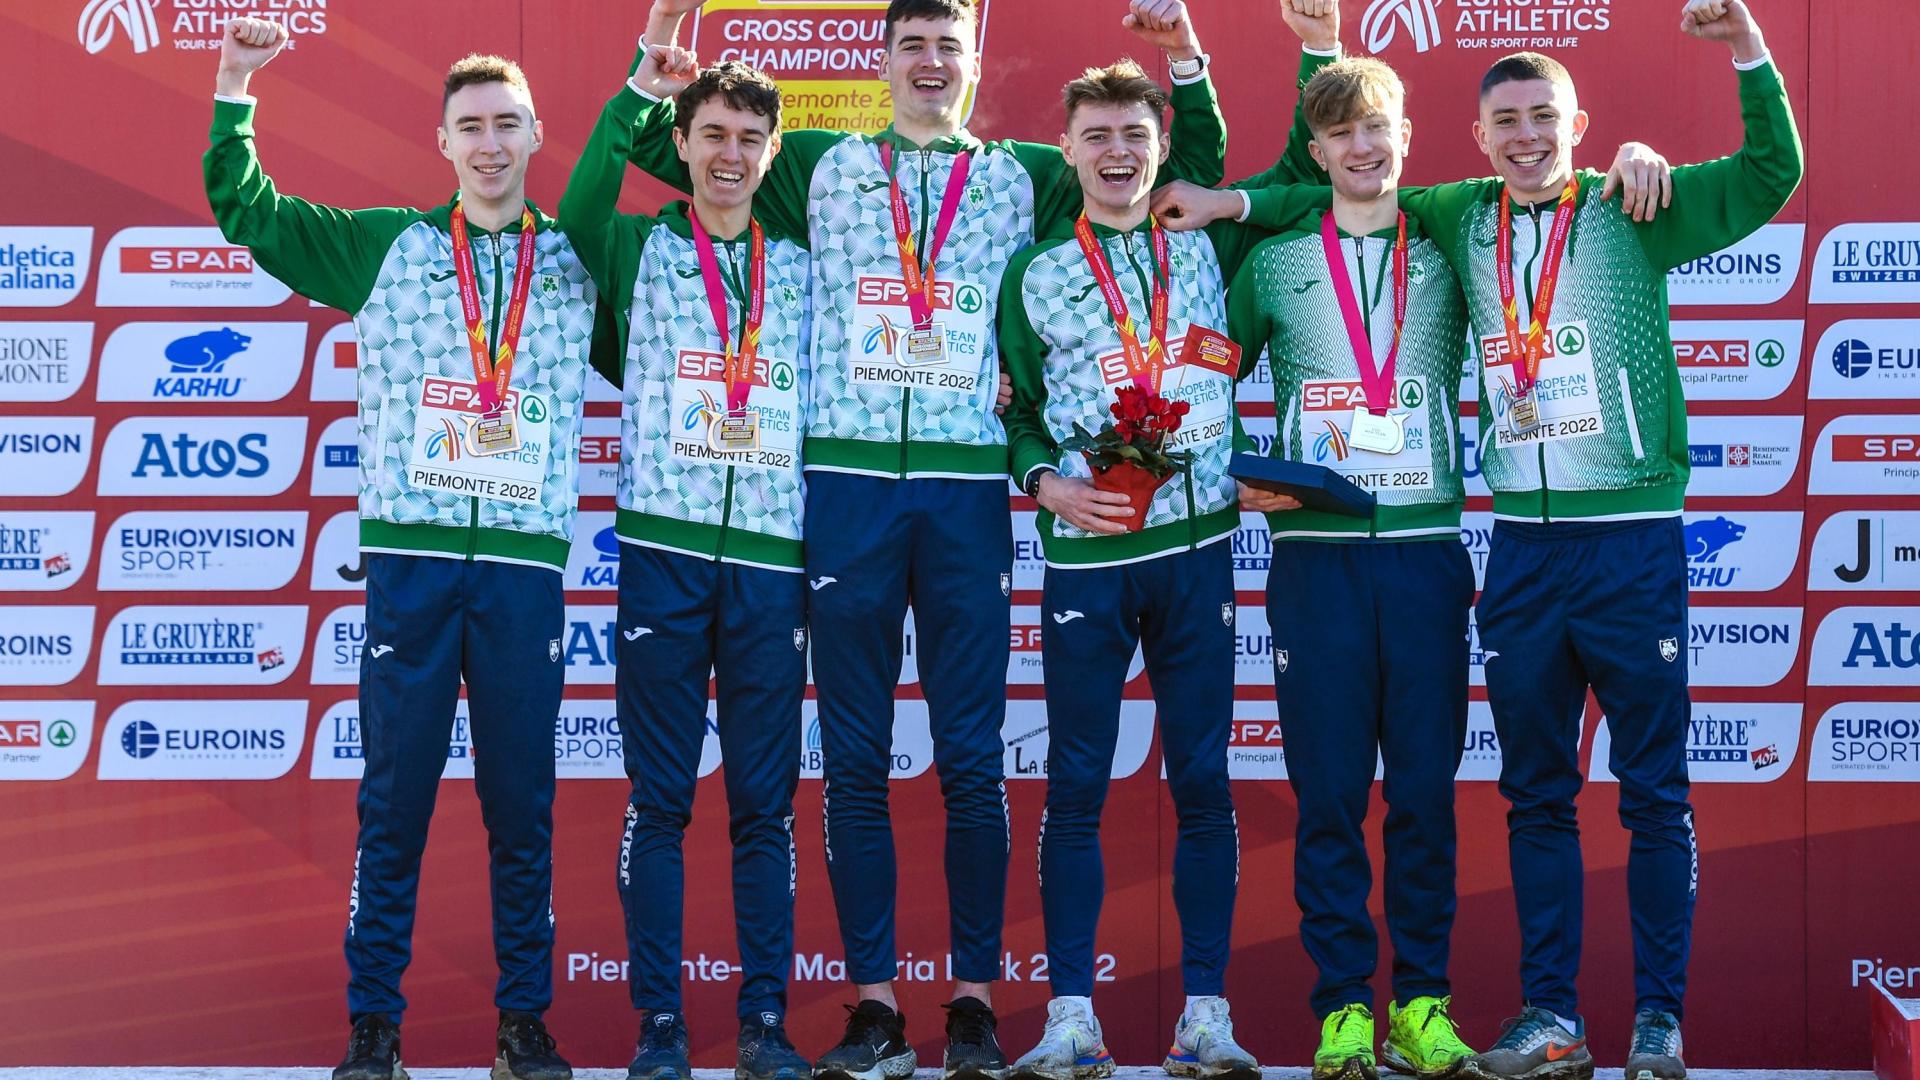 Members of the Irish U20 team - including DCU's Sean McGinley - at the European Championships 2022. Pic courtesy of Sportsfile